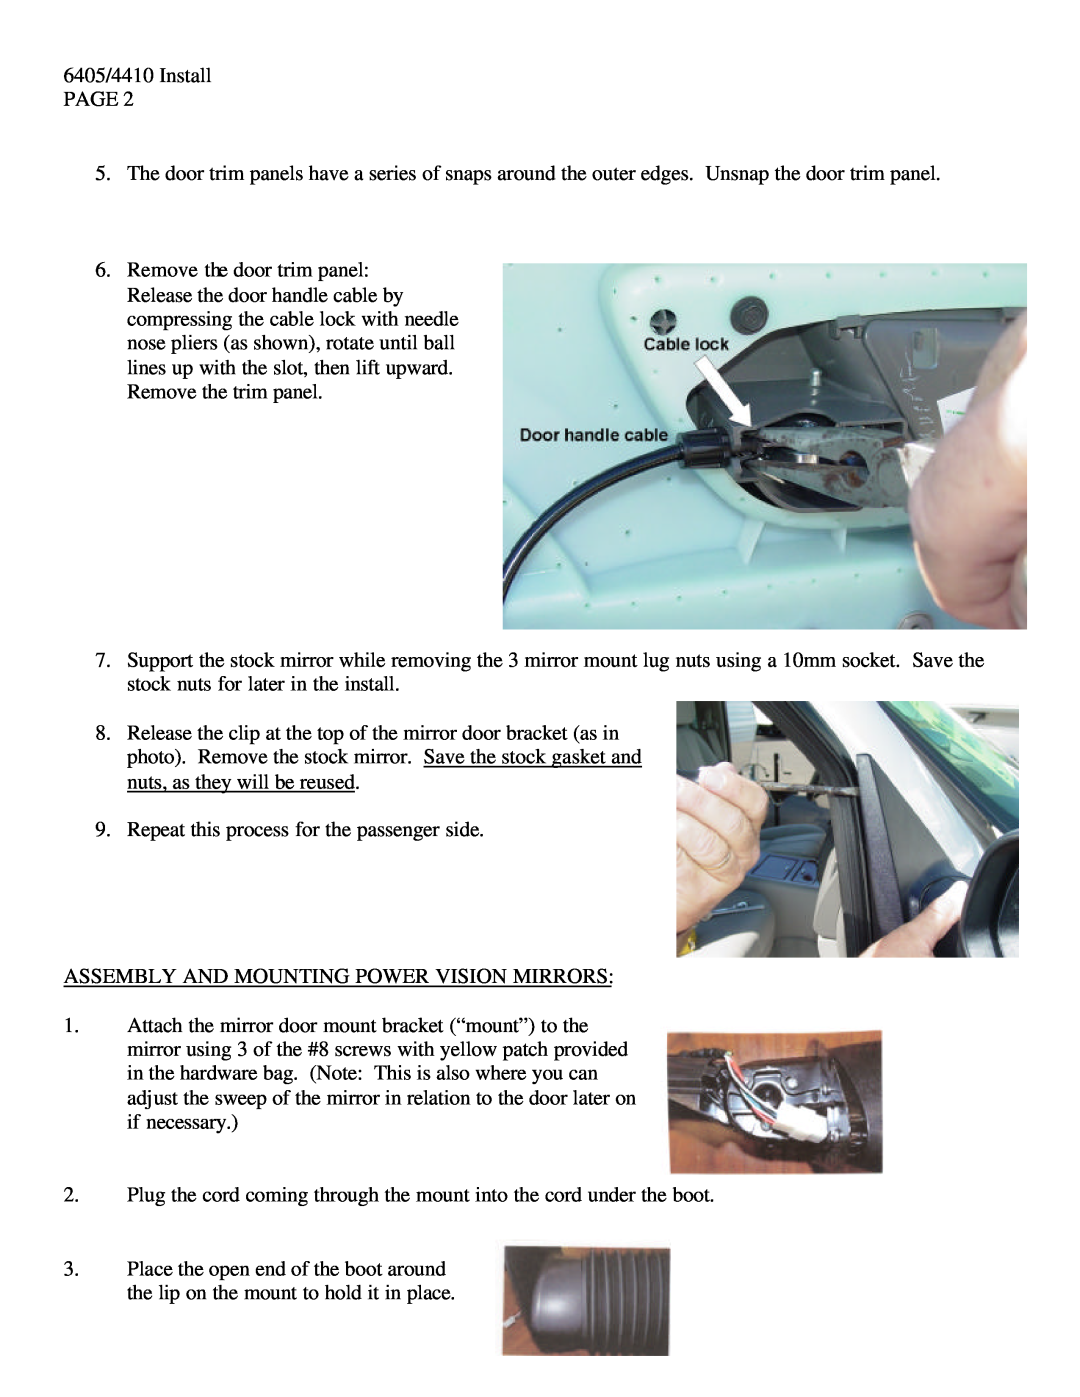 Chevrolet Power Vision, 6405/4410TK 6405/4410 Install PAGE, Repeat this process for the passenger side 